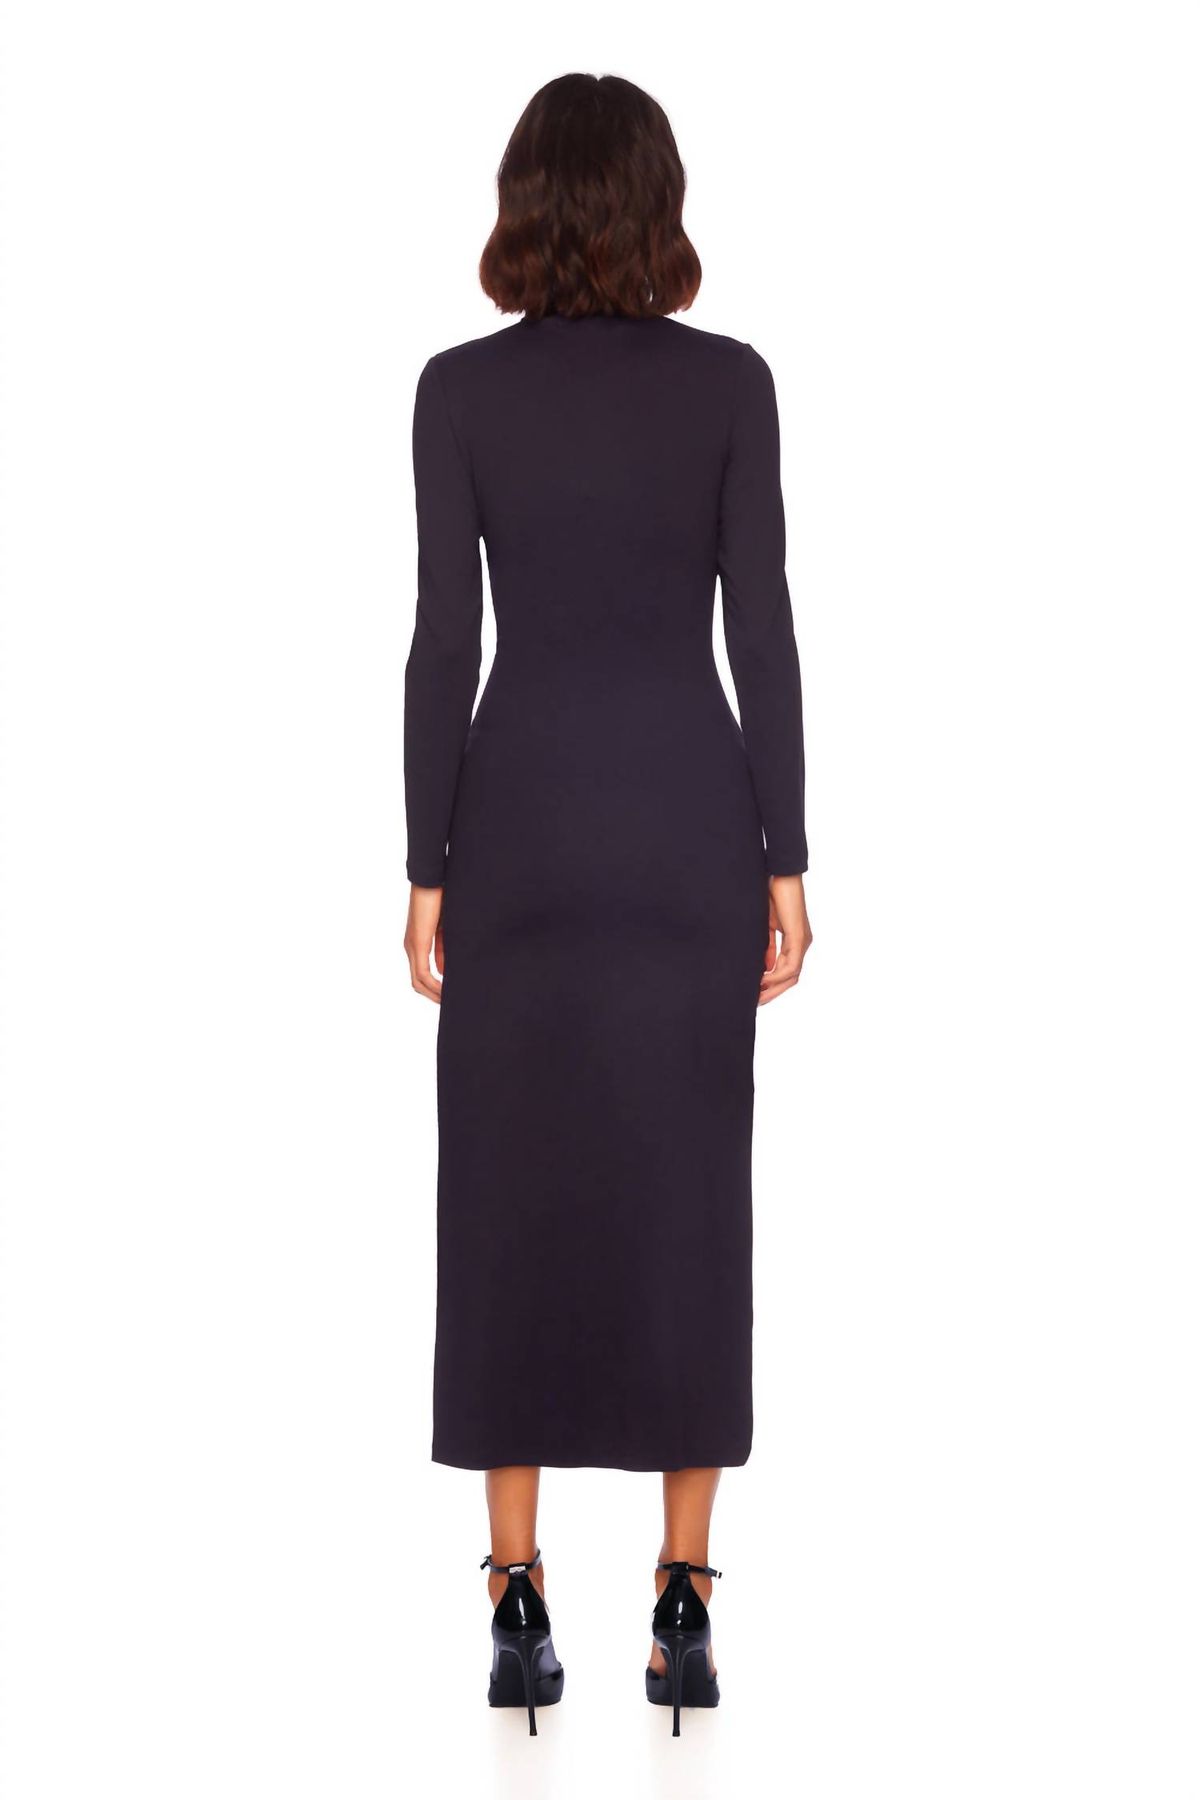 Style 1-518984391-3855 Susana Monaco Size XS Long Sleeve Black Cocktail Dress on Queenly